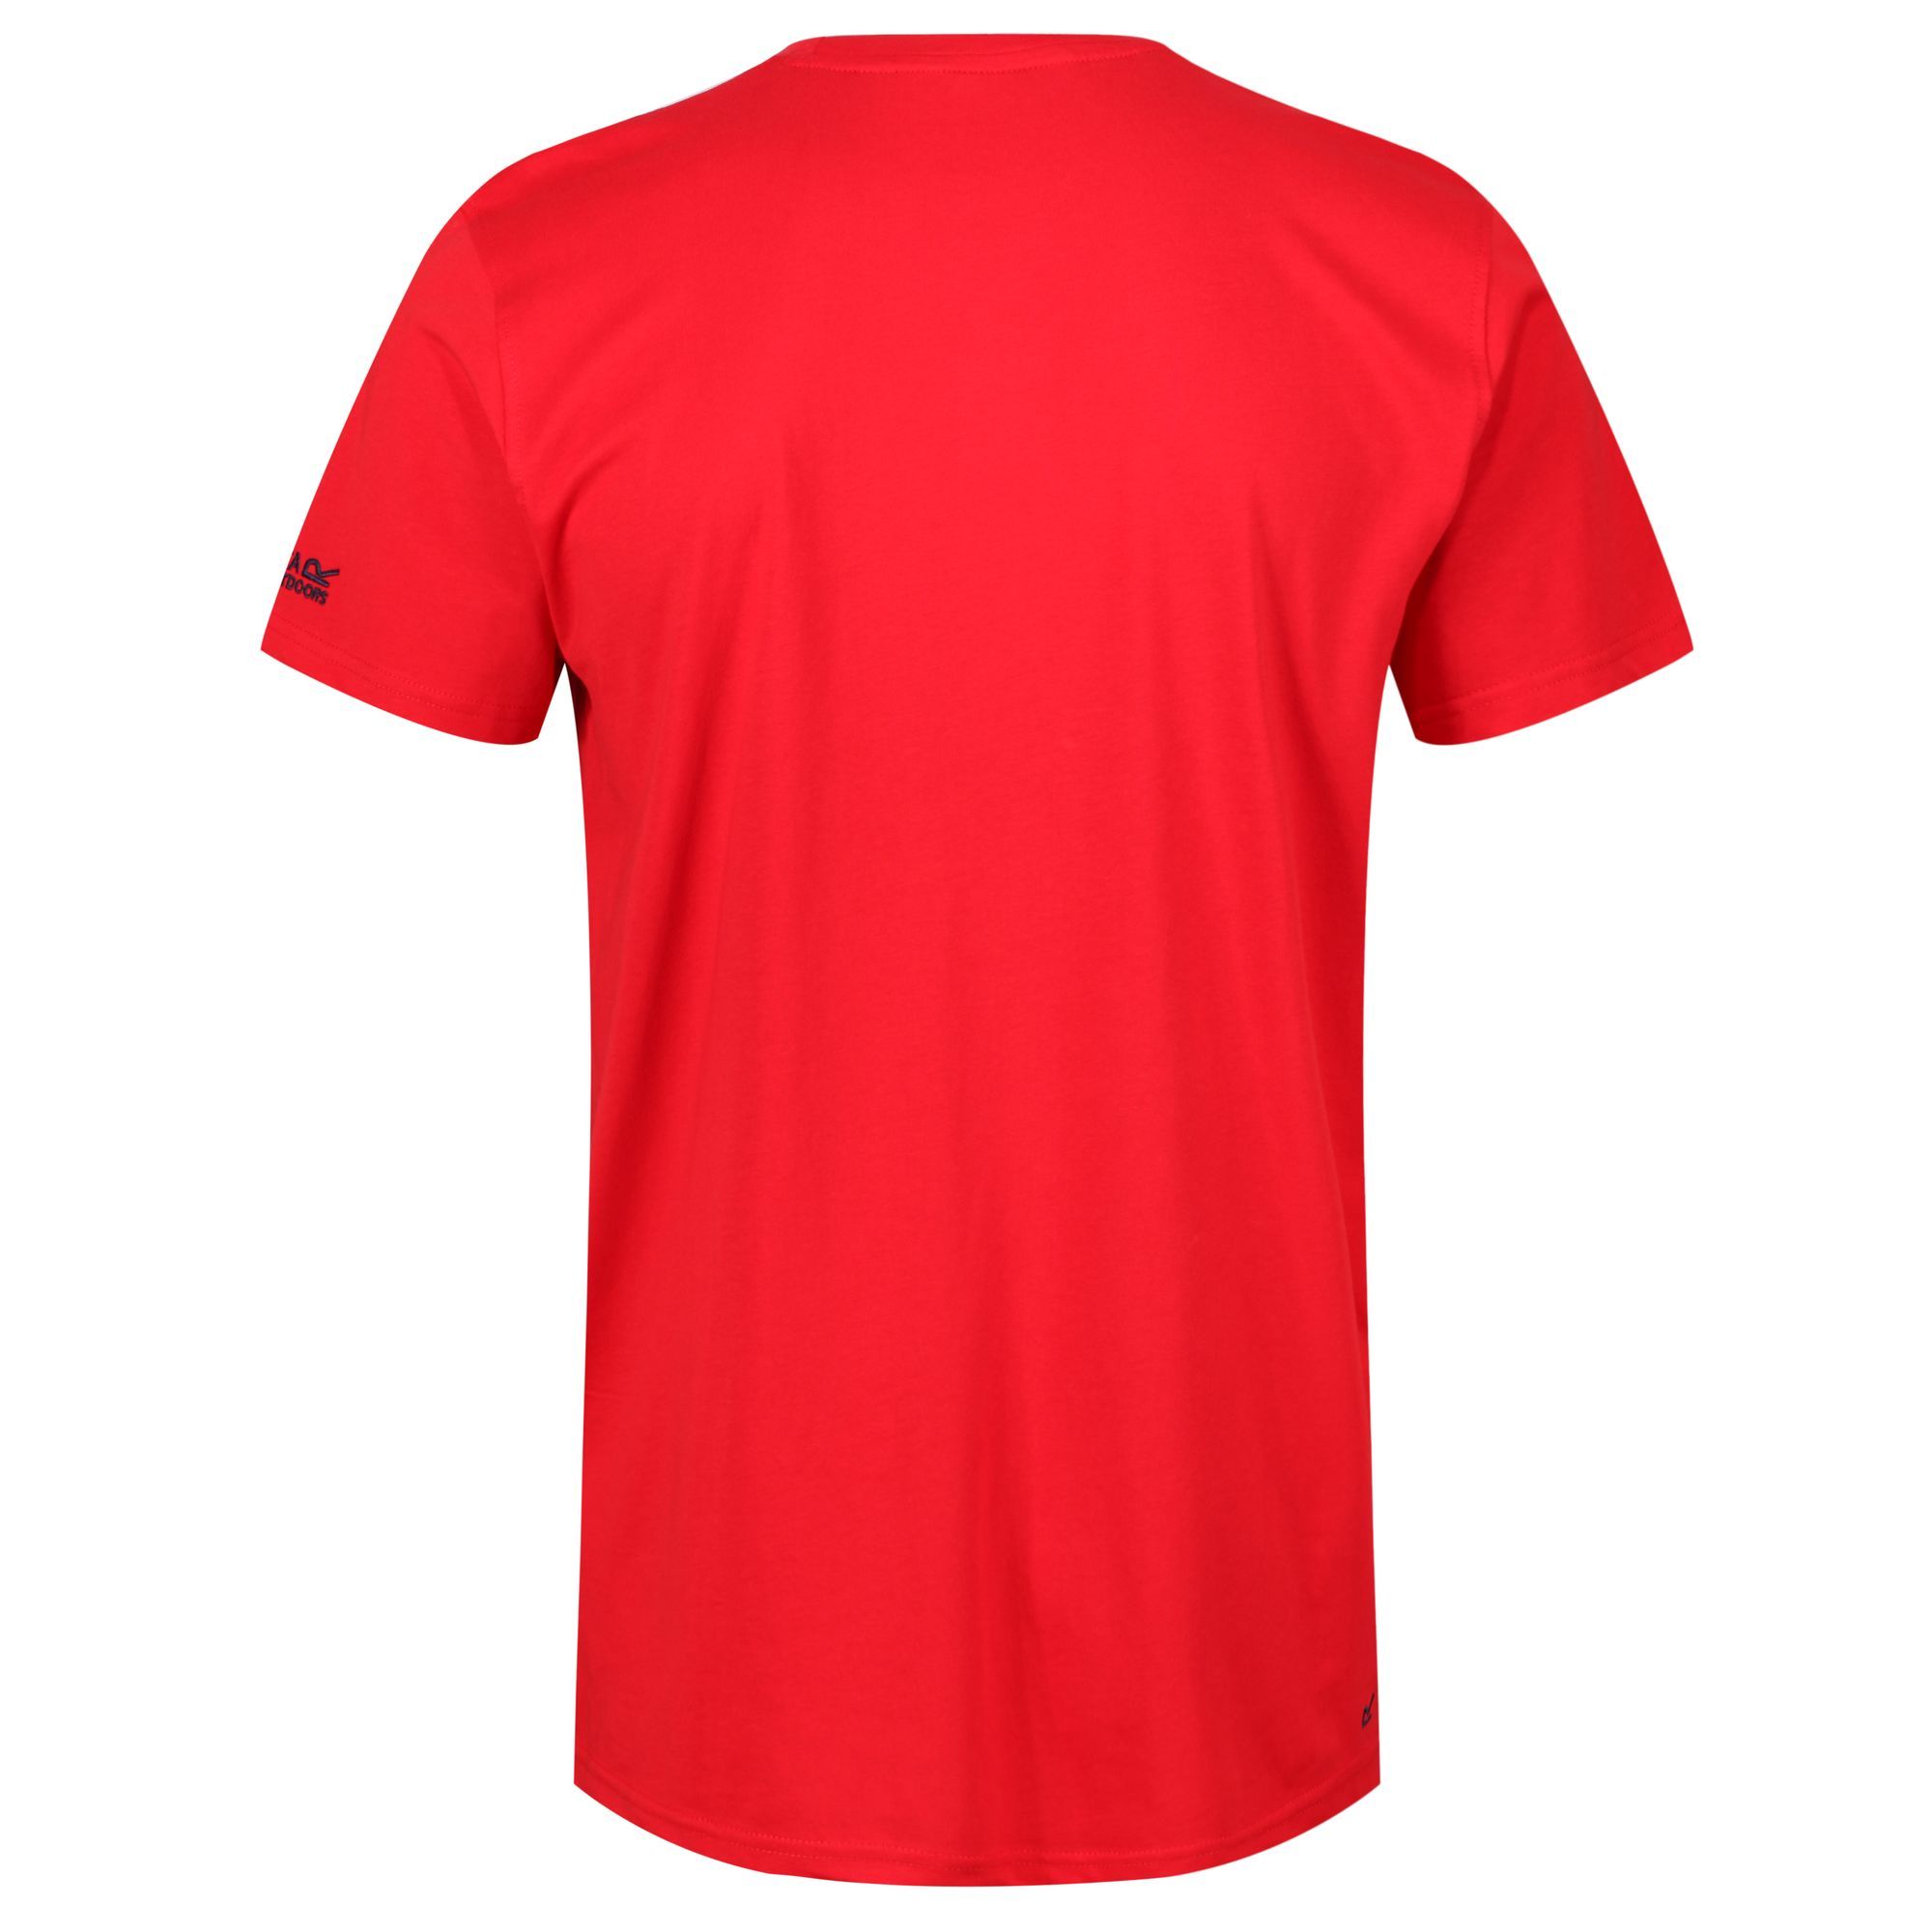 Regular fit crew neck T-shirt made from soft Coolweave Cotton jersey that is naturally breathable and light-to-wear. Features a cool graphic print. 100% cotton.